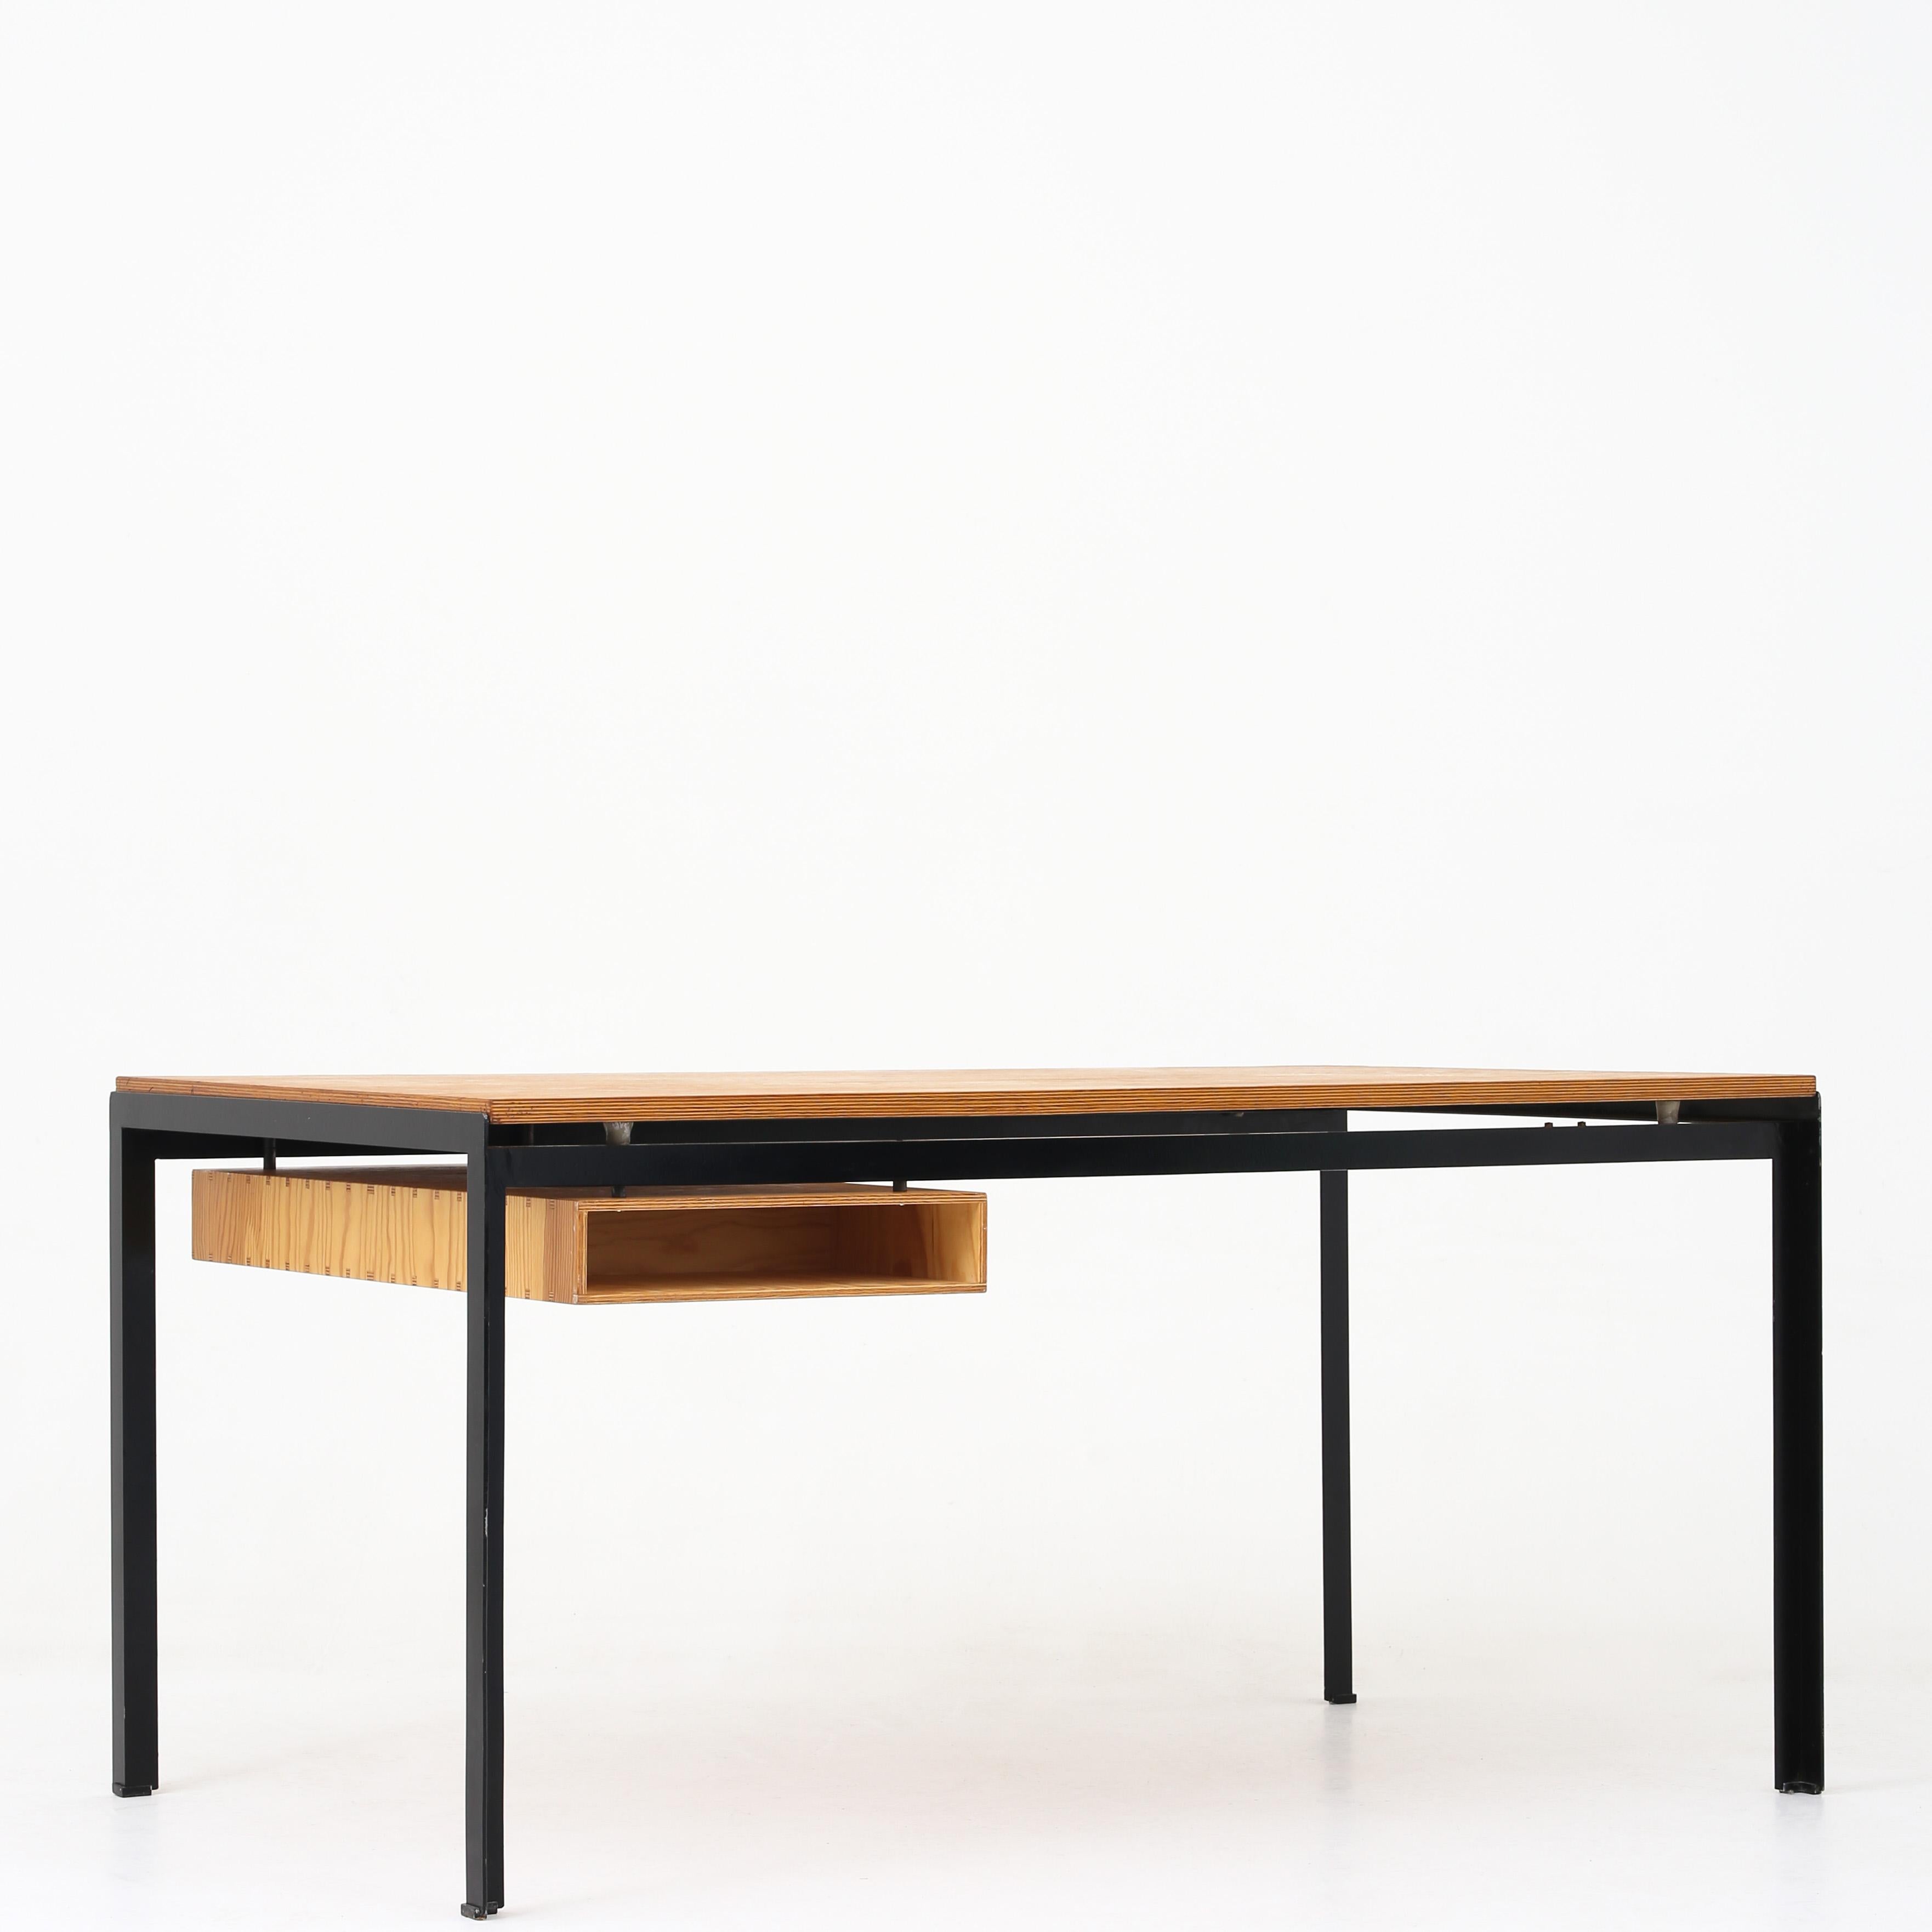 Poul Kjærholm PK 52 - 'Student's Table' with top and drawer module in patinated pine on black angle iron frame. Maker RUd. Rasmussen.